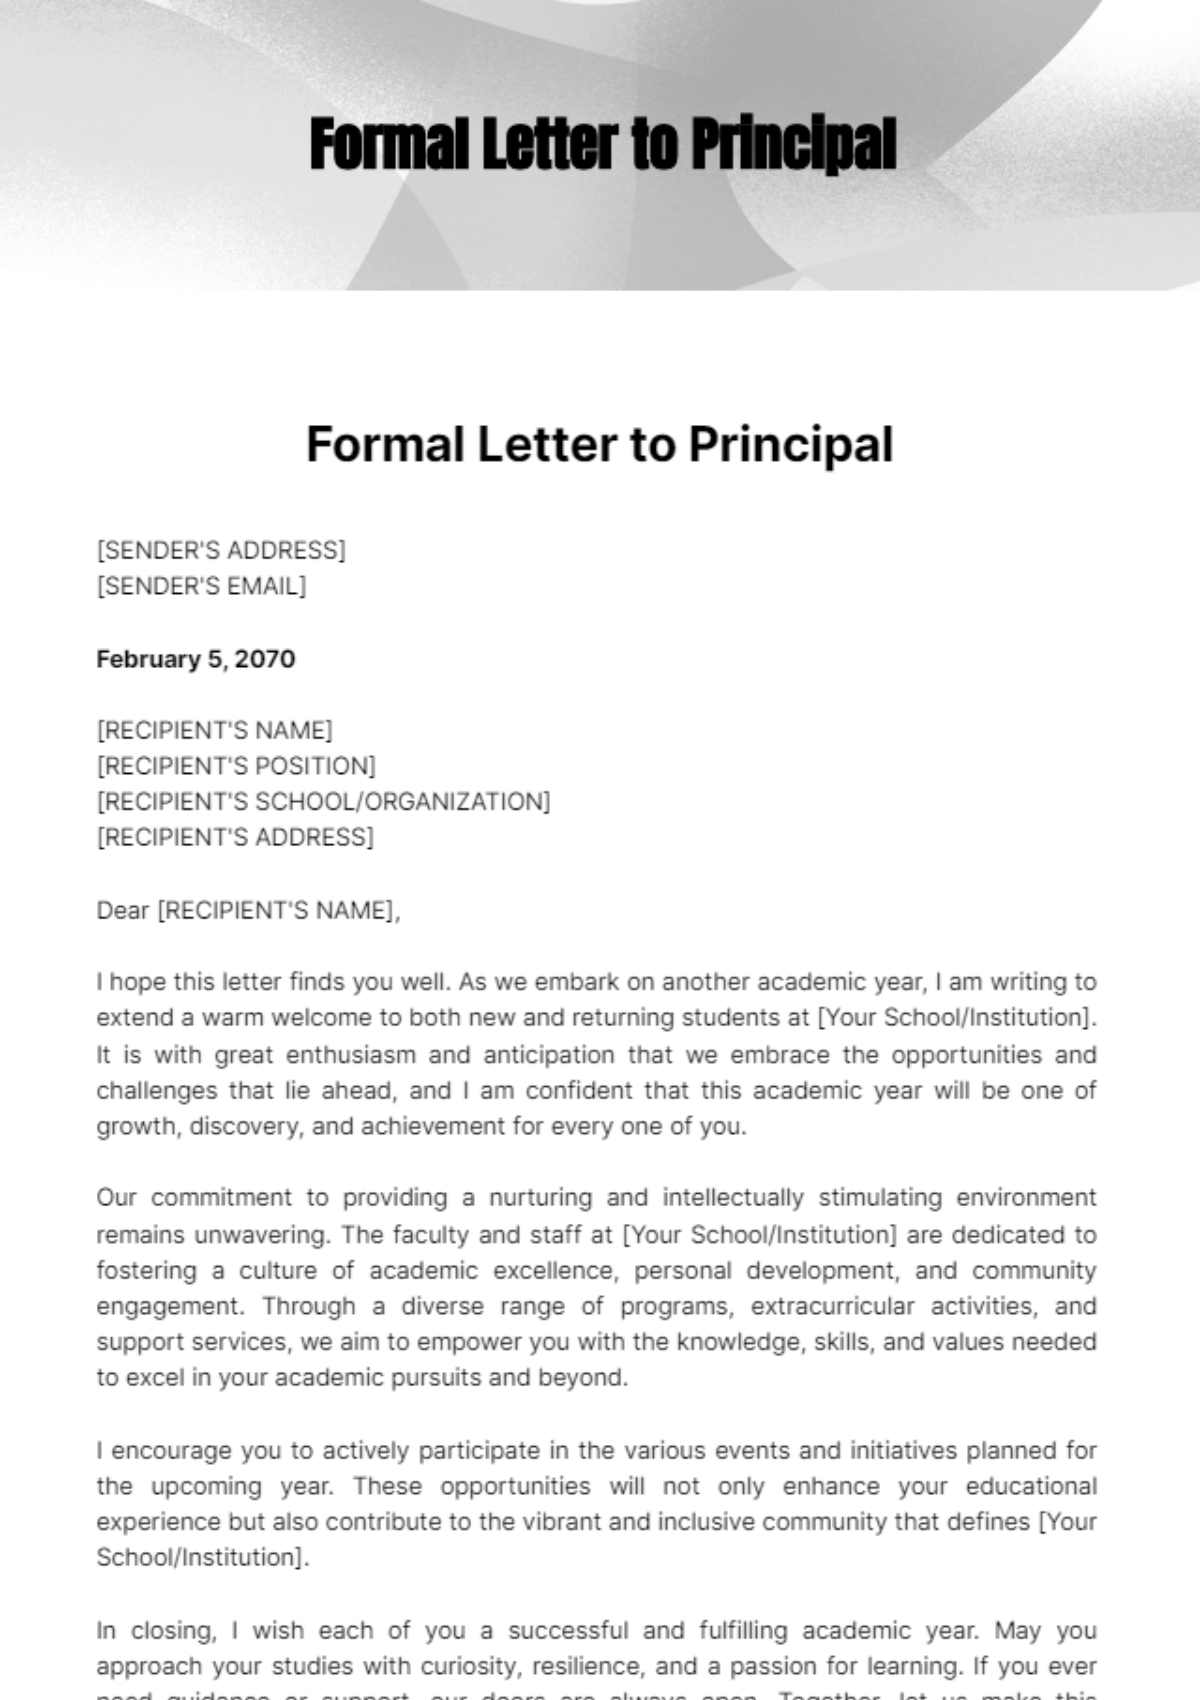 Free Formal Letter to Principal Template